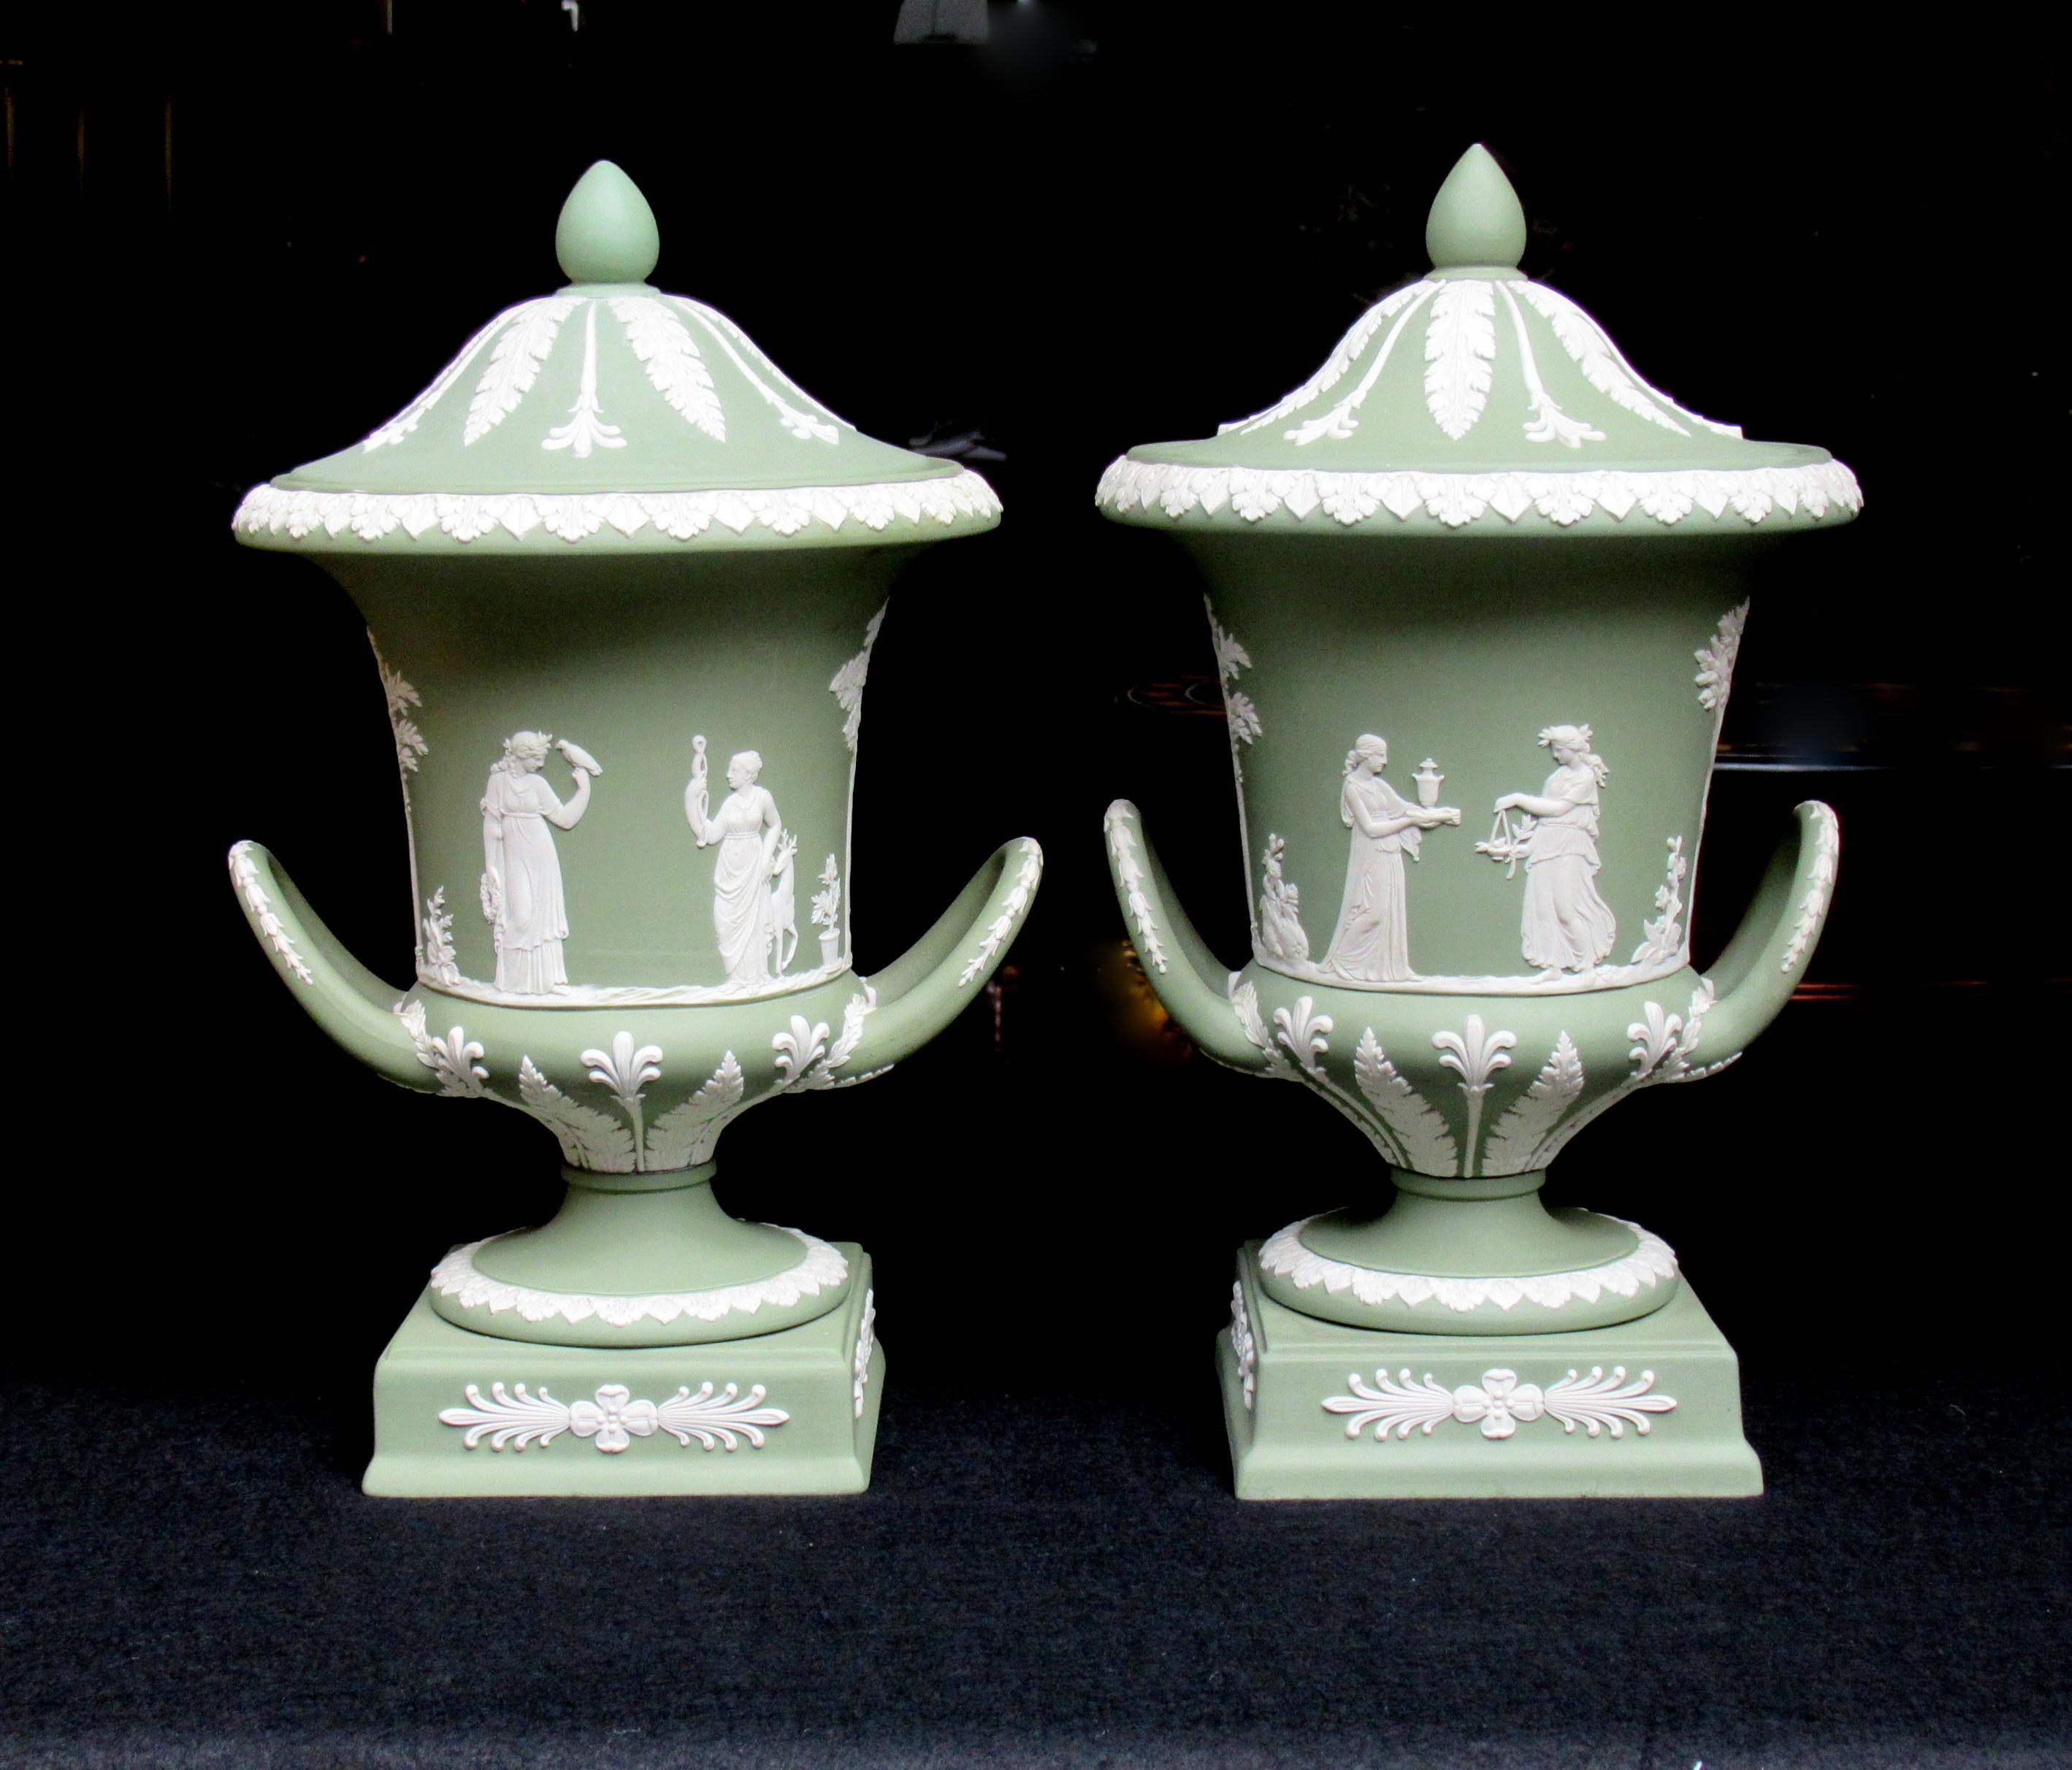 An exceptionally fine quality pair of English Jasperware Wedgwood urns of outstanding quality and condition and good size proportions, circa 1950. 

Each of classical urn form replete with neoclassical floral and foliate decoration depicting